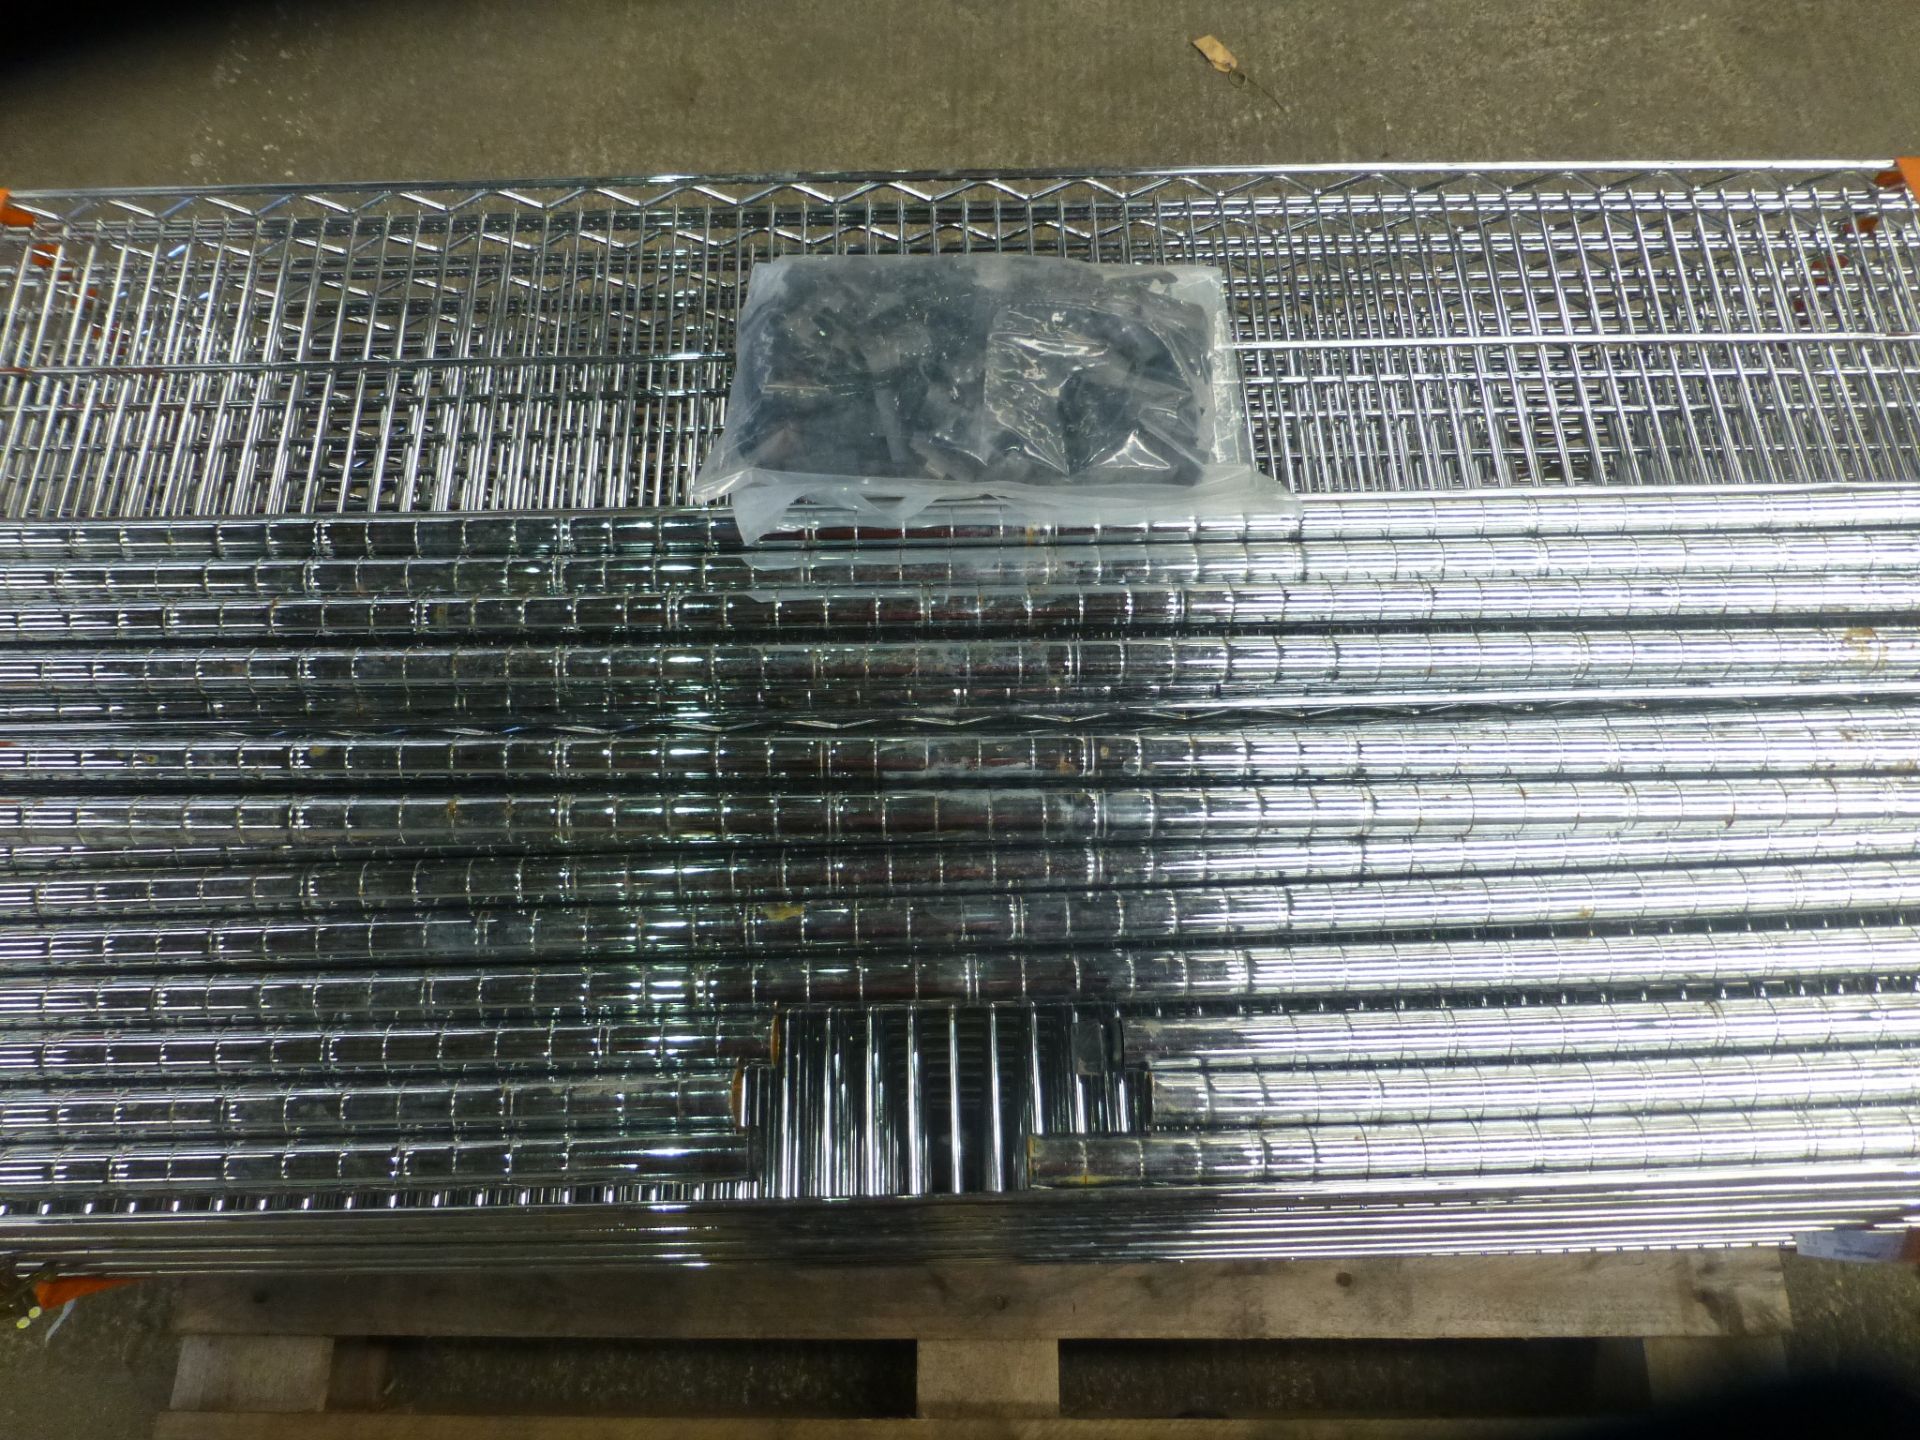 Stainless Steel Racking - Image 4 of 4